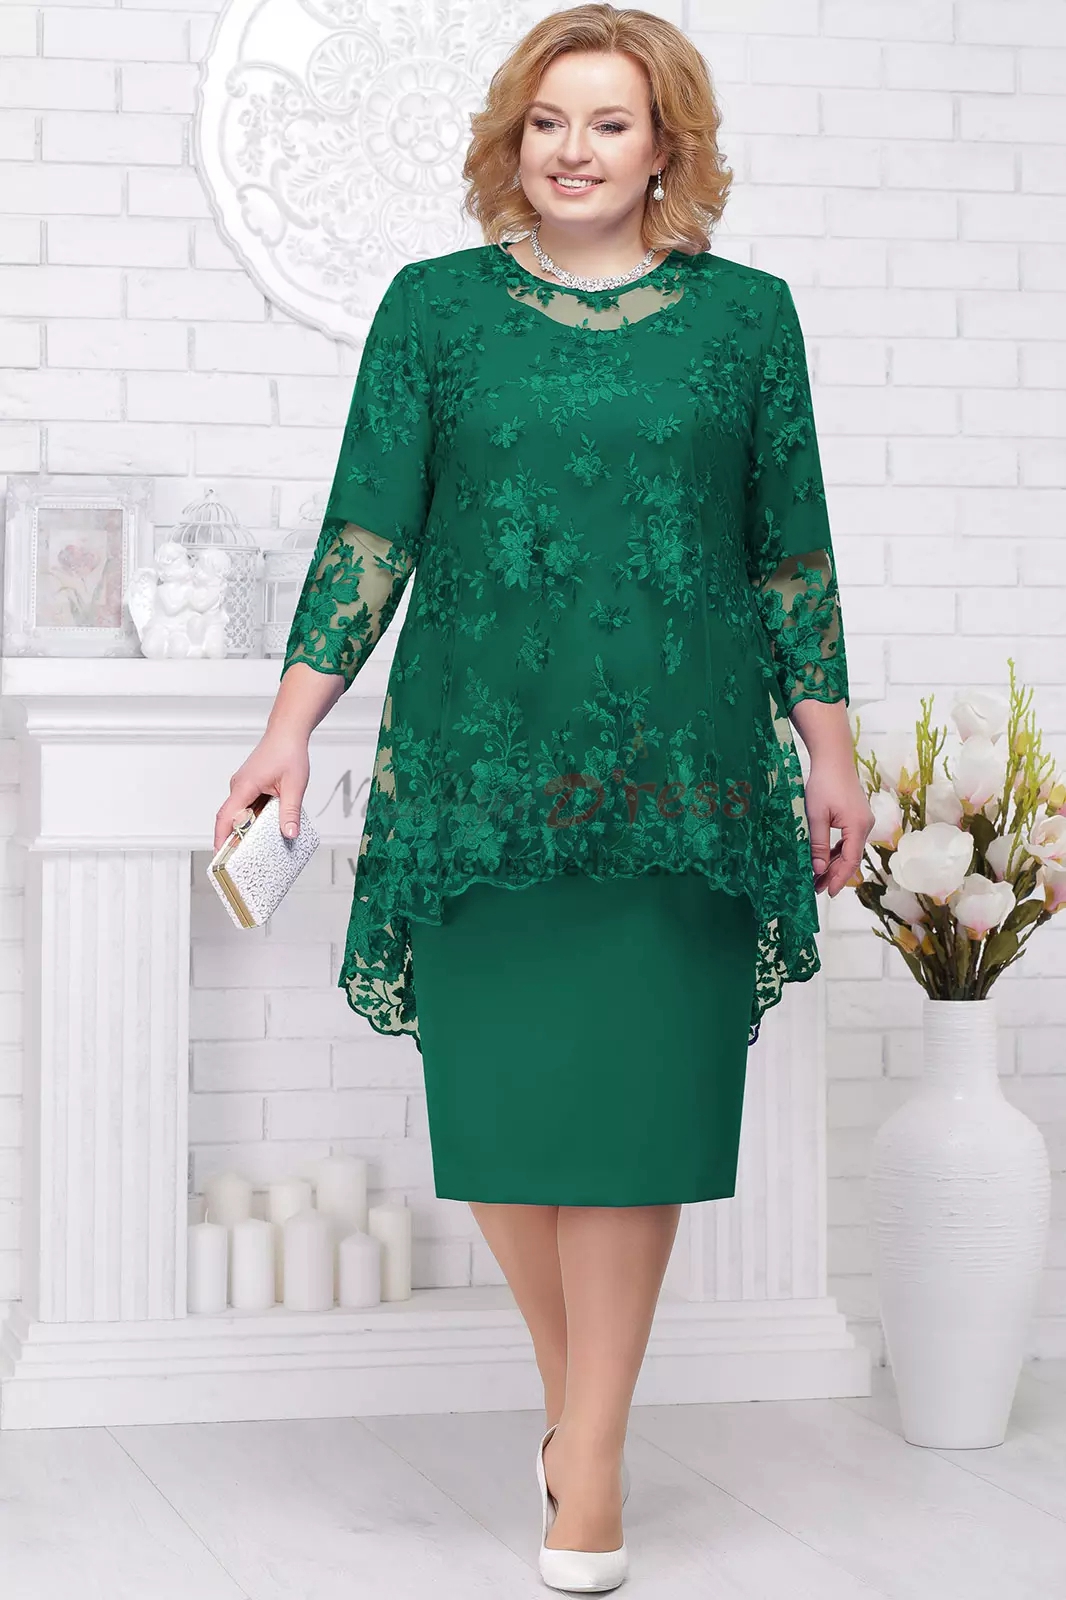 plus size mother of the bride outfits to hire